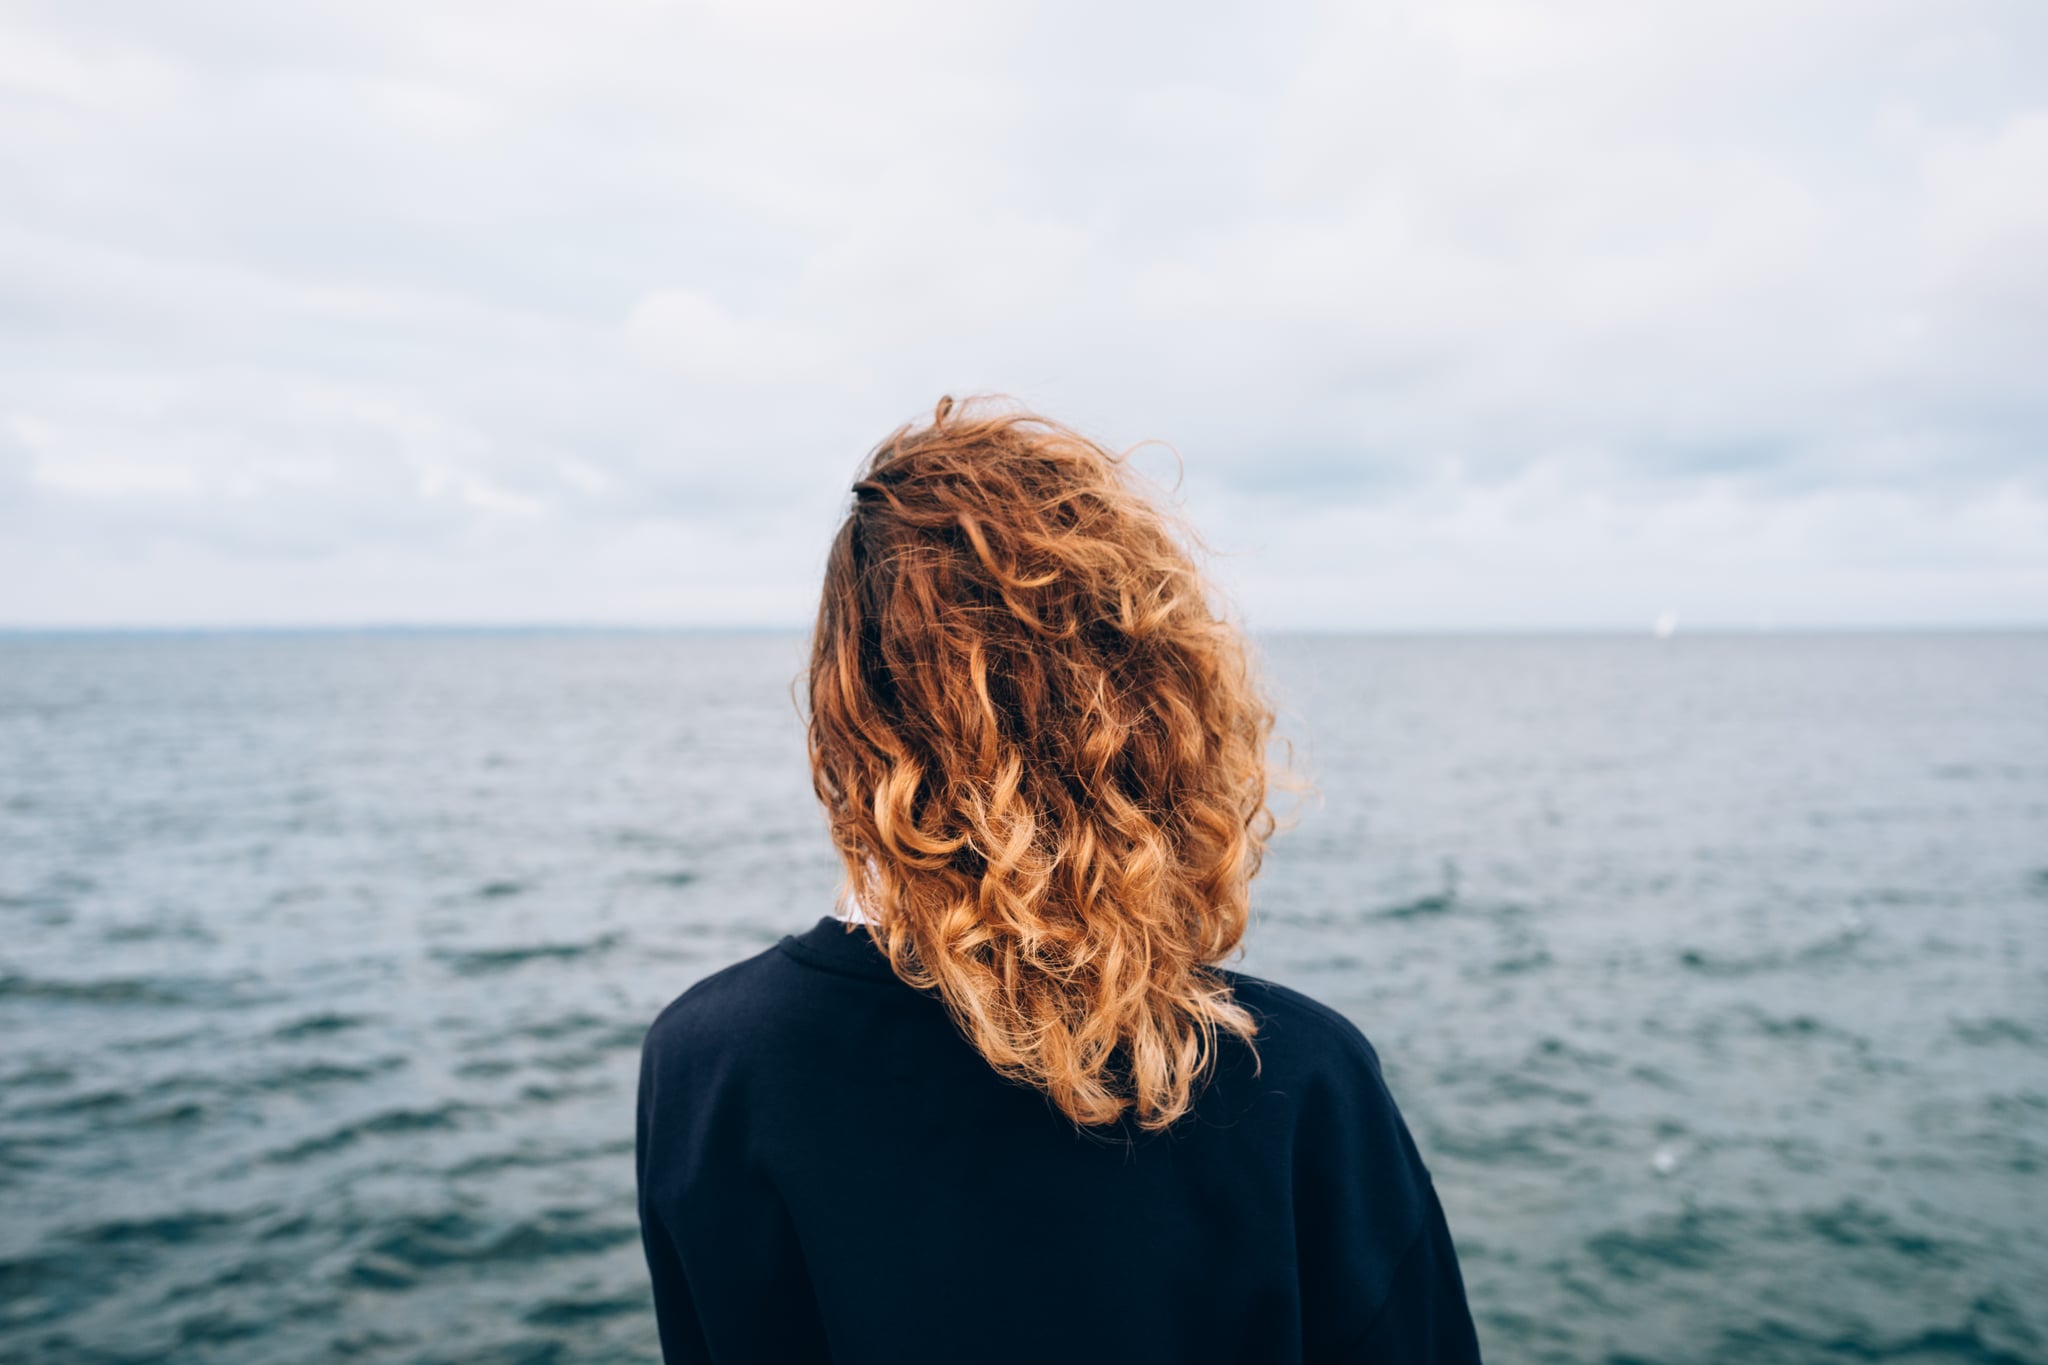 Female with red curly hair outdoors standing alone thinking near blue water. Rear view of young woman looking at sea.